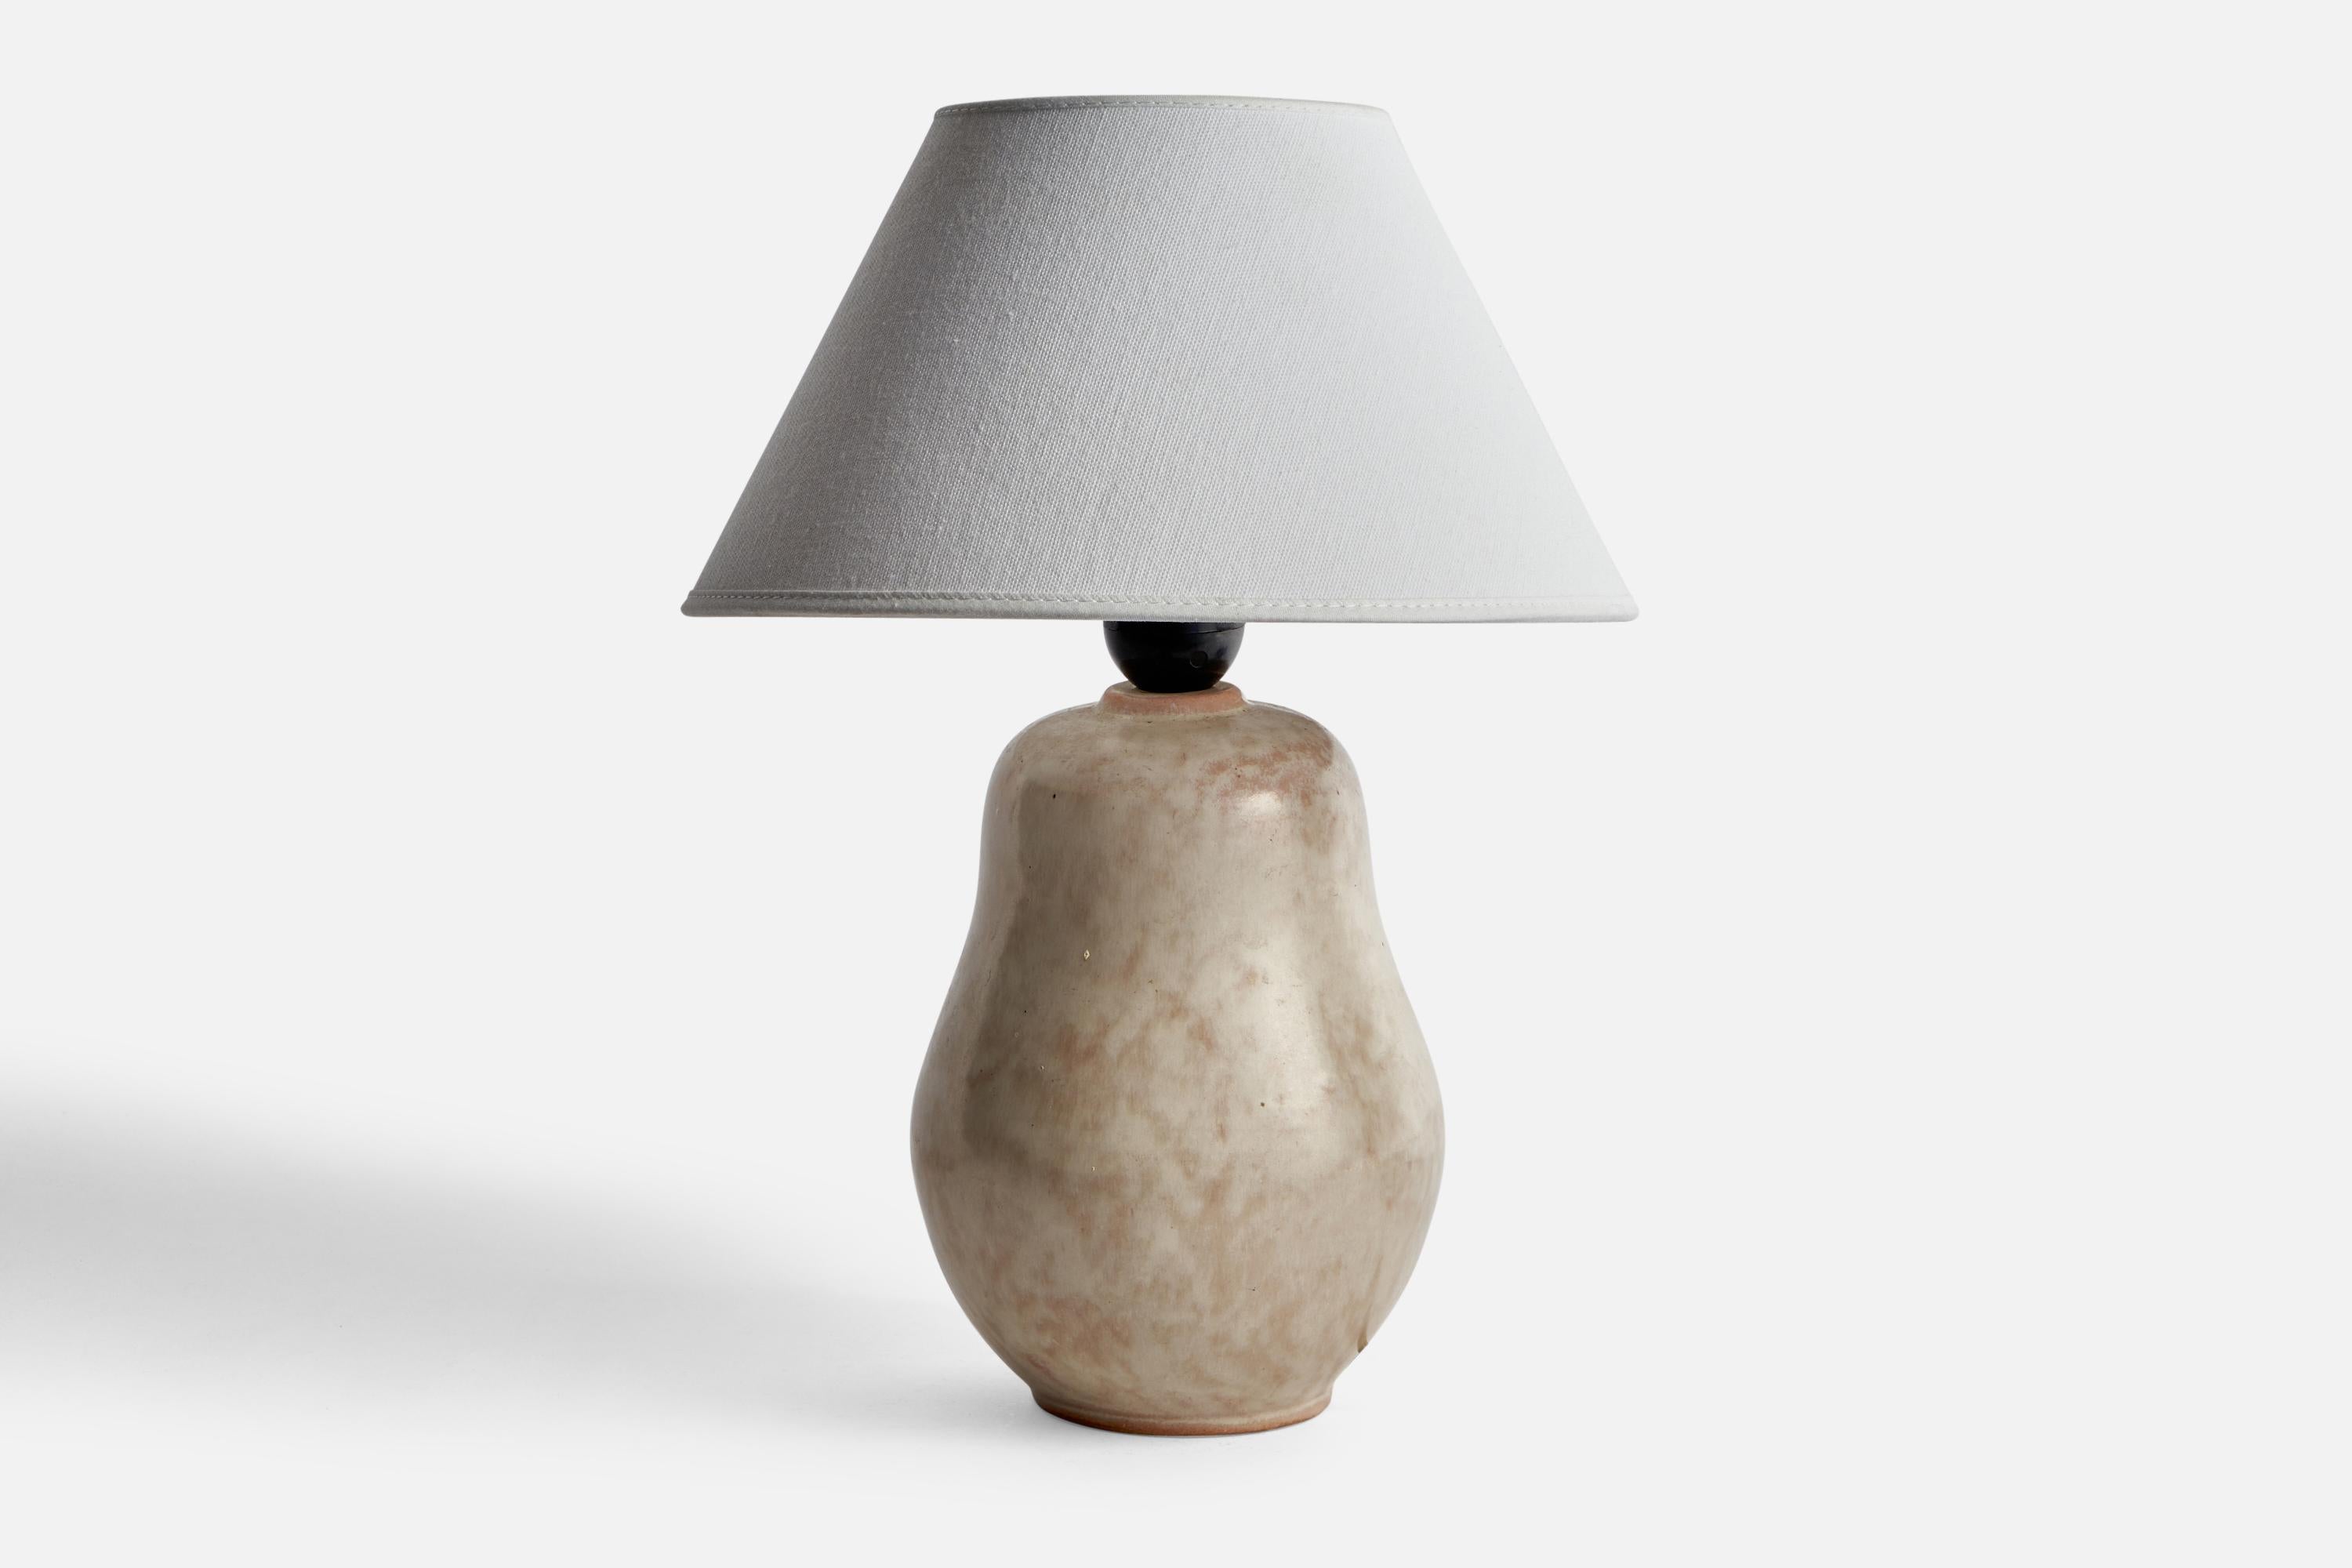 A grey-glazed ceramic table lamp designed and produced in Sweden, c. 1940s.

Dimensions of Lamp (inches): 10” H x 5.65” Diameter
Dimensions of Shade (inches): 4.5” Top Diameter x 10” Bottom Diameter x 5.25” H
Dimensions of Lamp with Shade (inches):